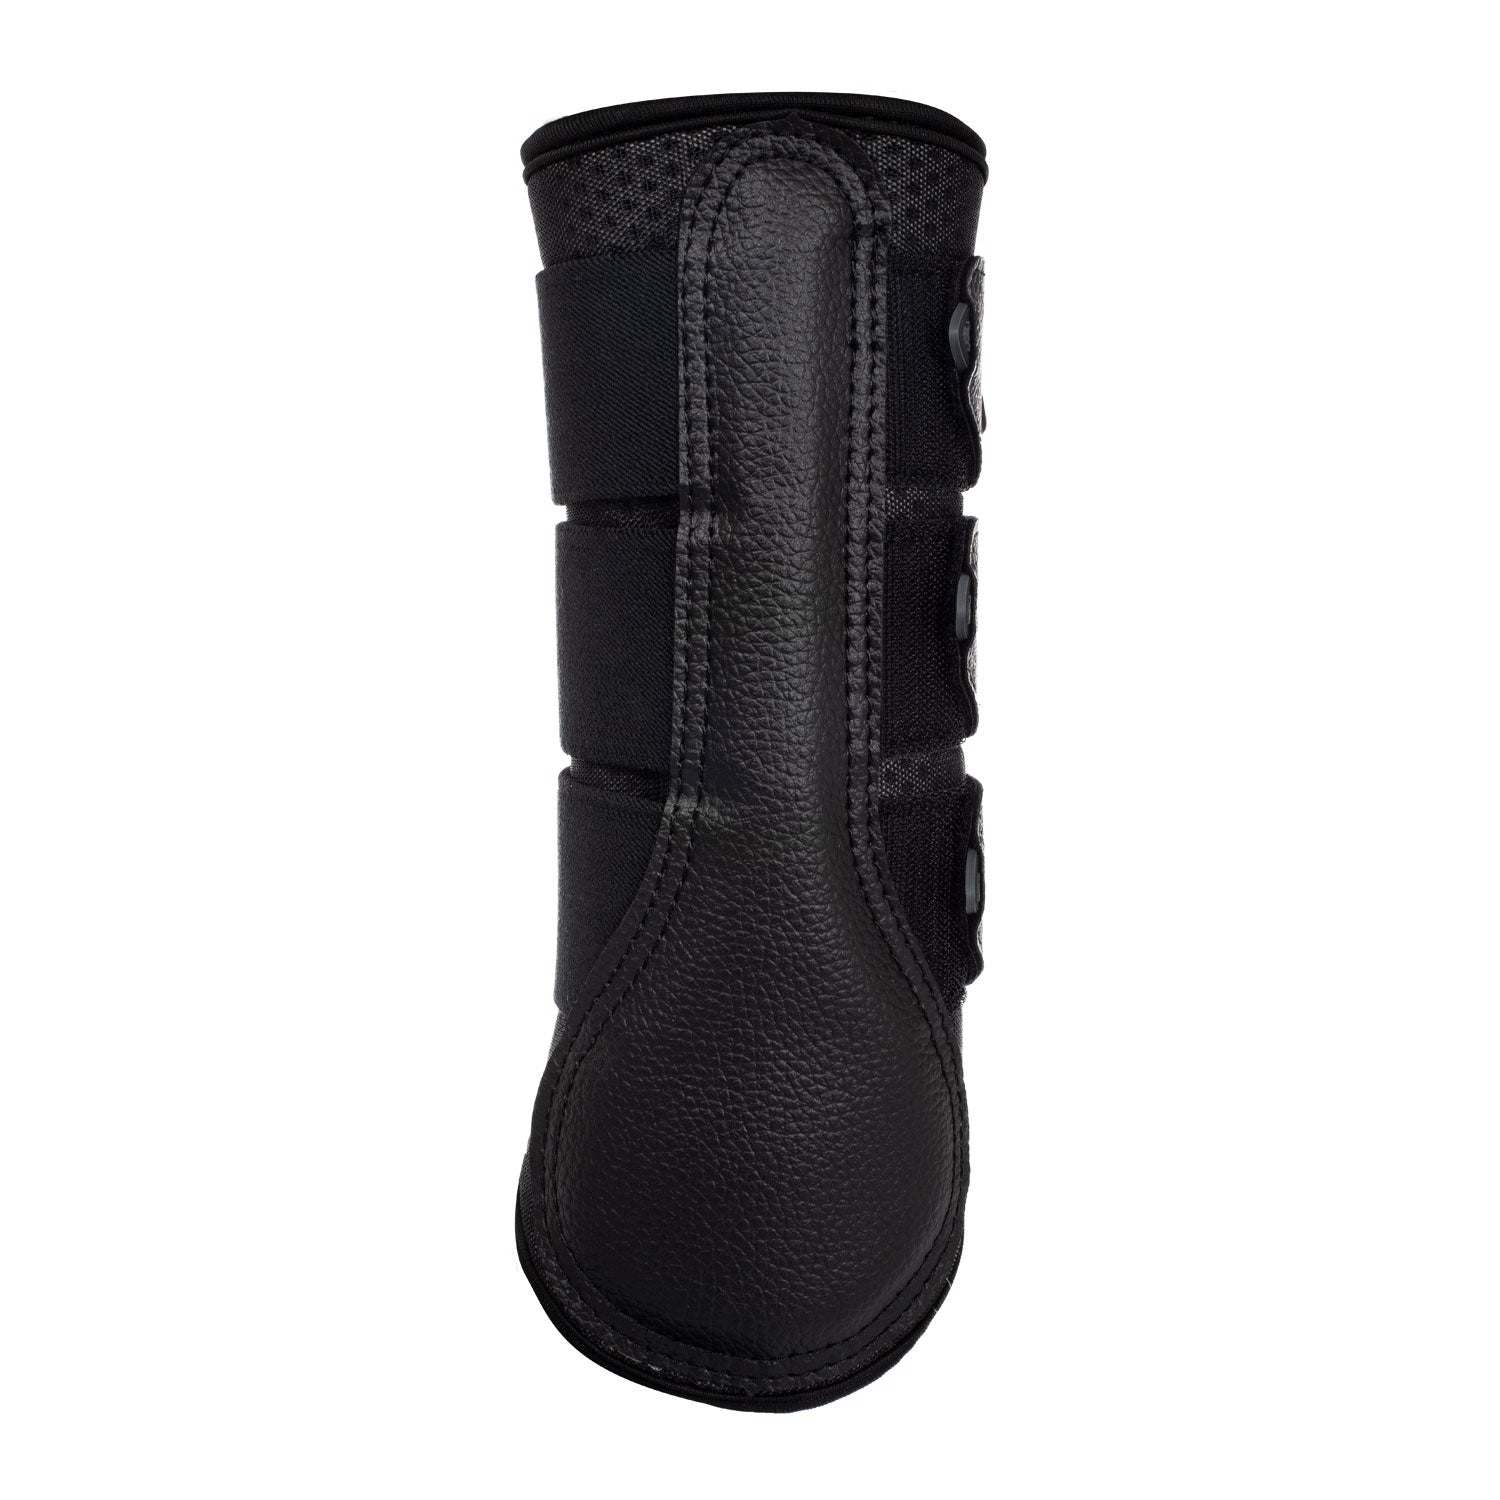 Best breathable turnout boots for horses